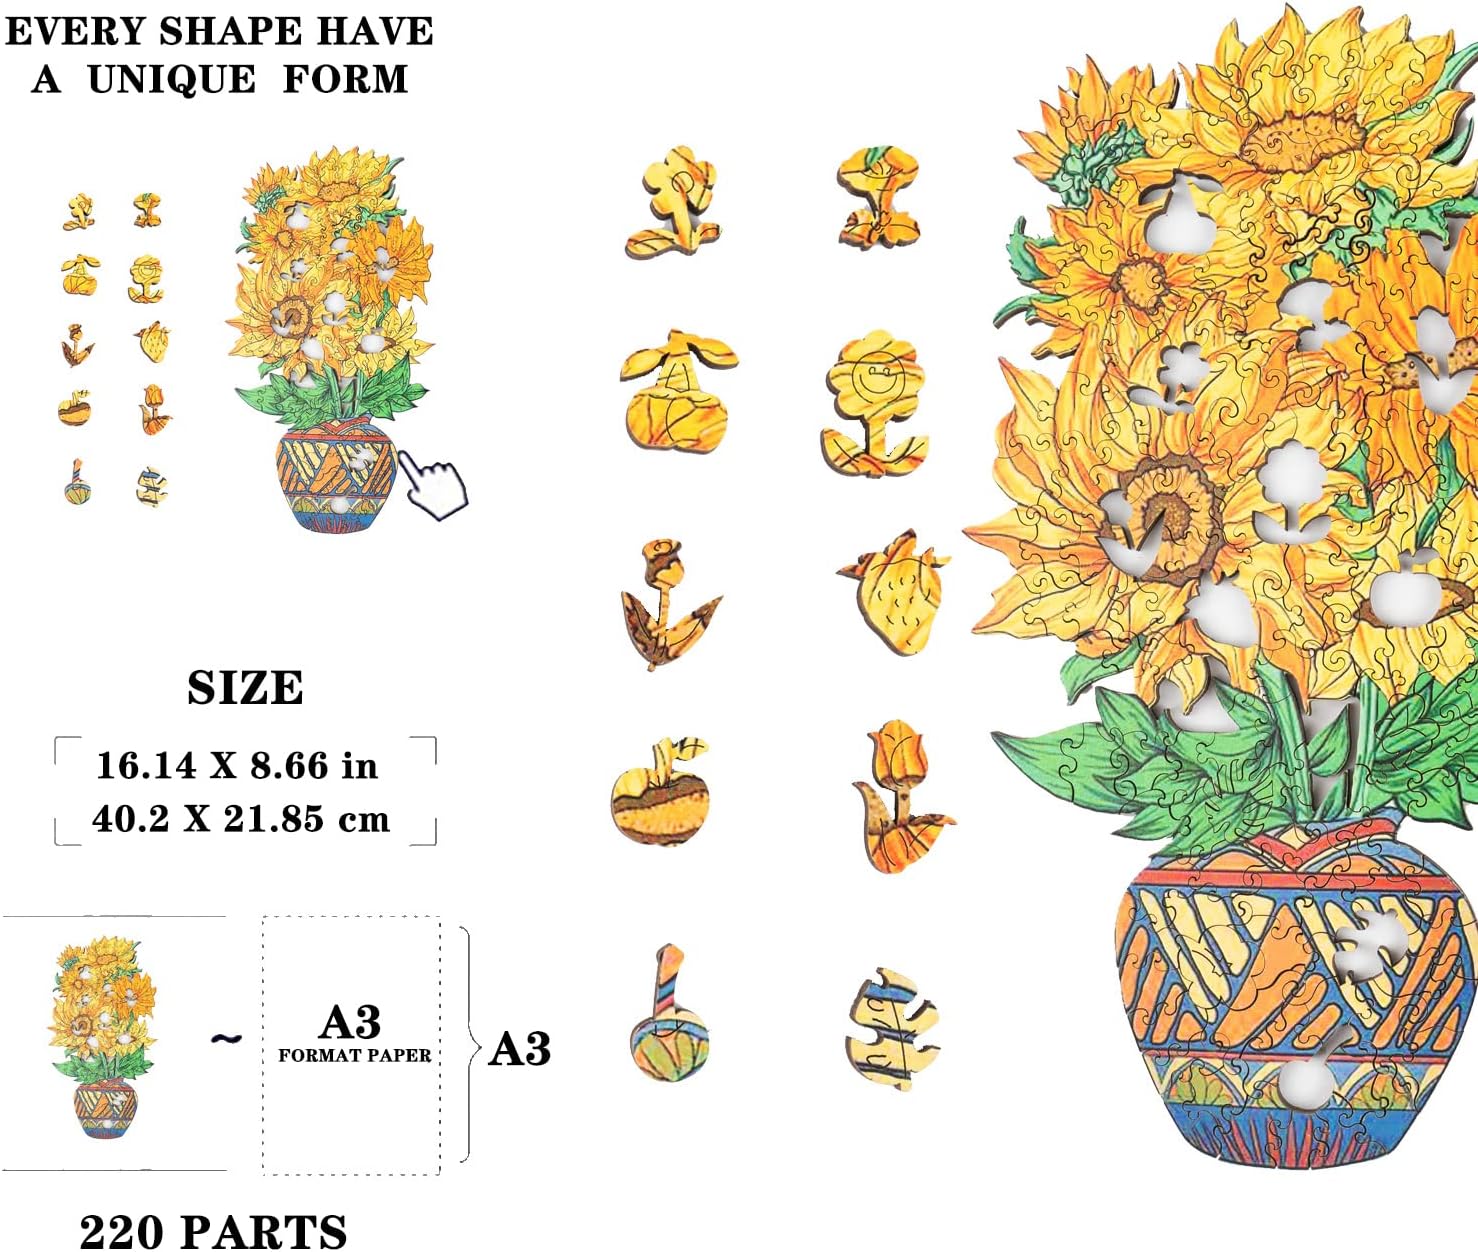 Wooden Puzzles for Adults, Sunflowers Wooden Jigsaw Puzzles,220 Pcs Unique Shaped Wooden Puzzles,Magic Wooden Puzzles, Best Gift for Adults and Kids, Family Game Play Collection, 16.14" X 8.66"